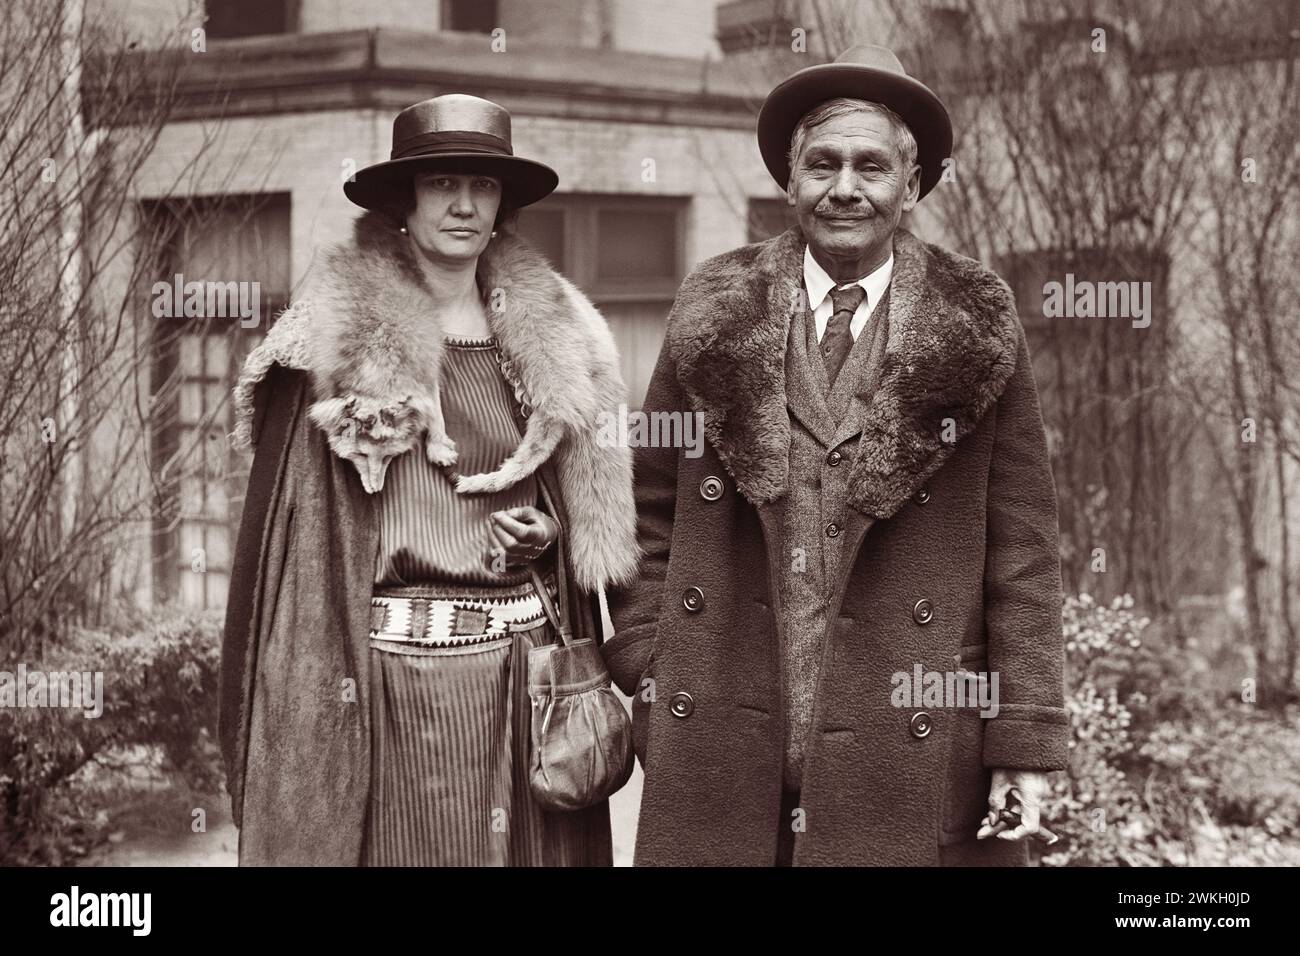 Jackson Barnett (1856-1934), who would become known as 'the world's richest Indian' due to oil found on his property in Oklahoma, and his wife at the White House in Washington, D.C., on February 2, 1923. Stock Photo